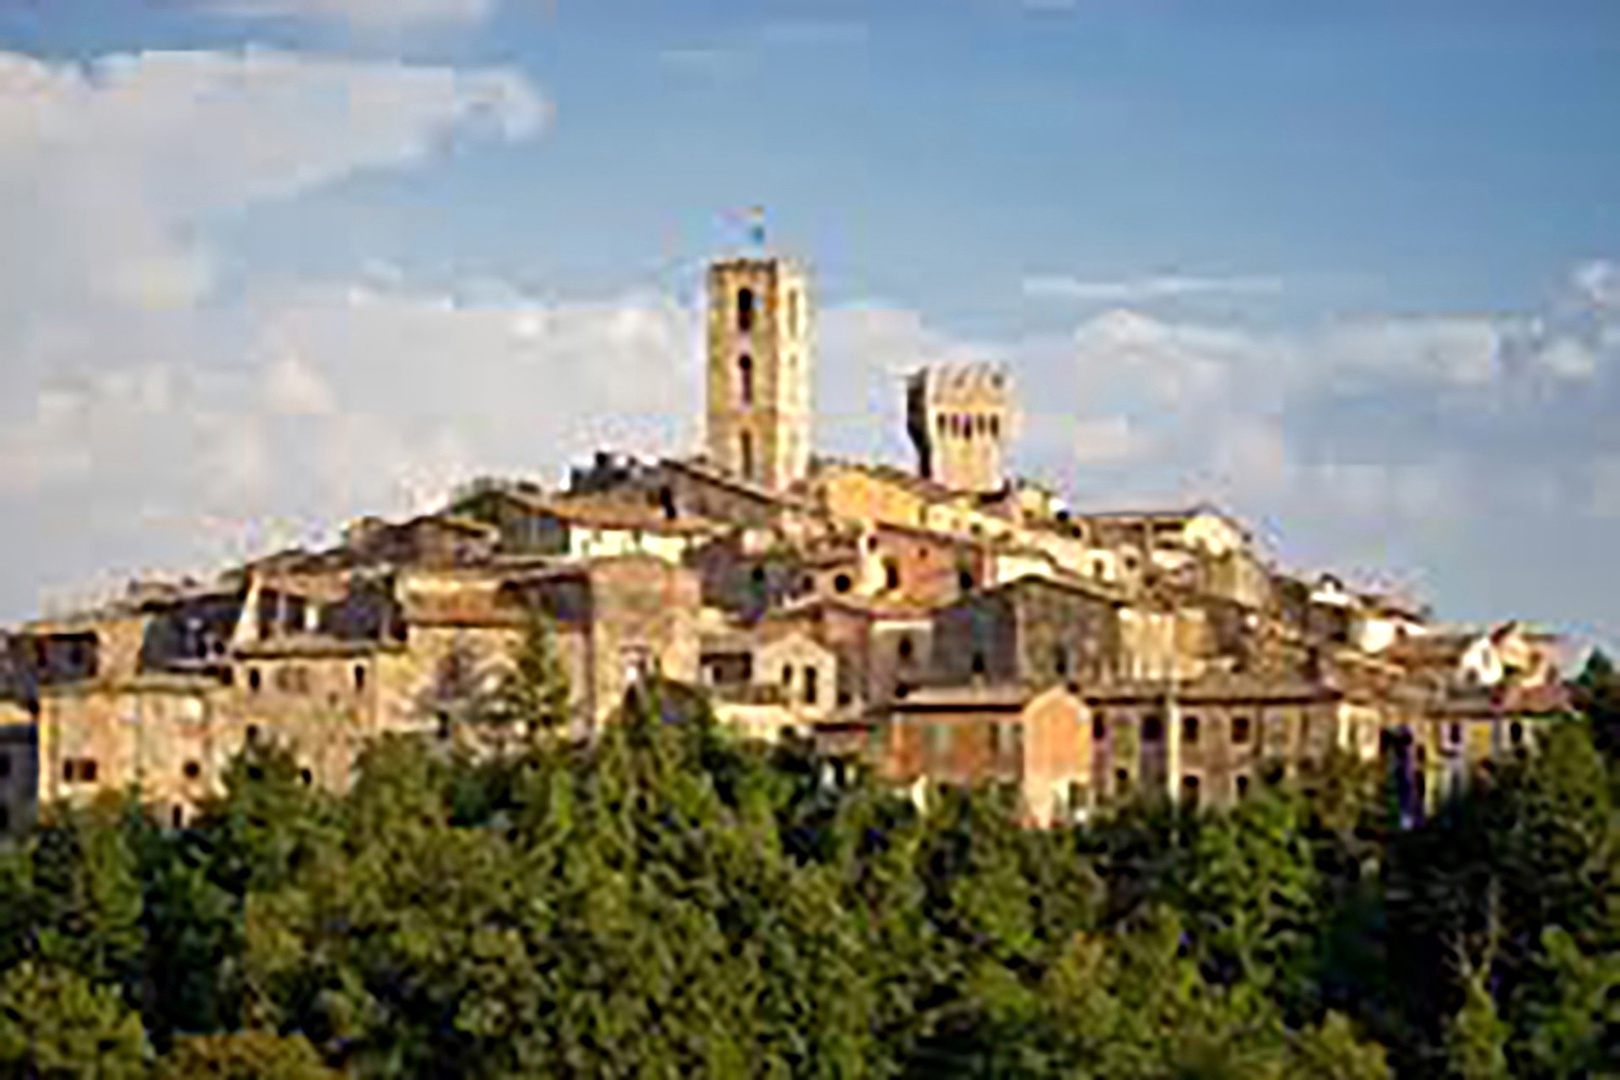 The nearest town an ancient settlement dating from at least Roman times, San Casciano Val di Pesa.